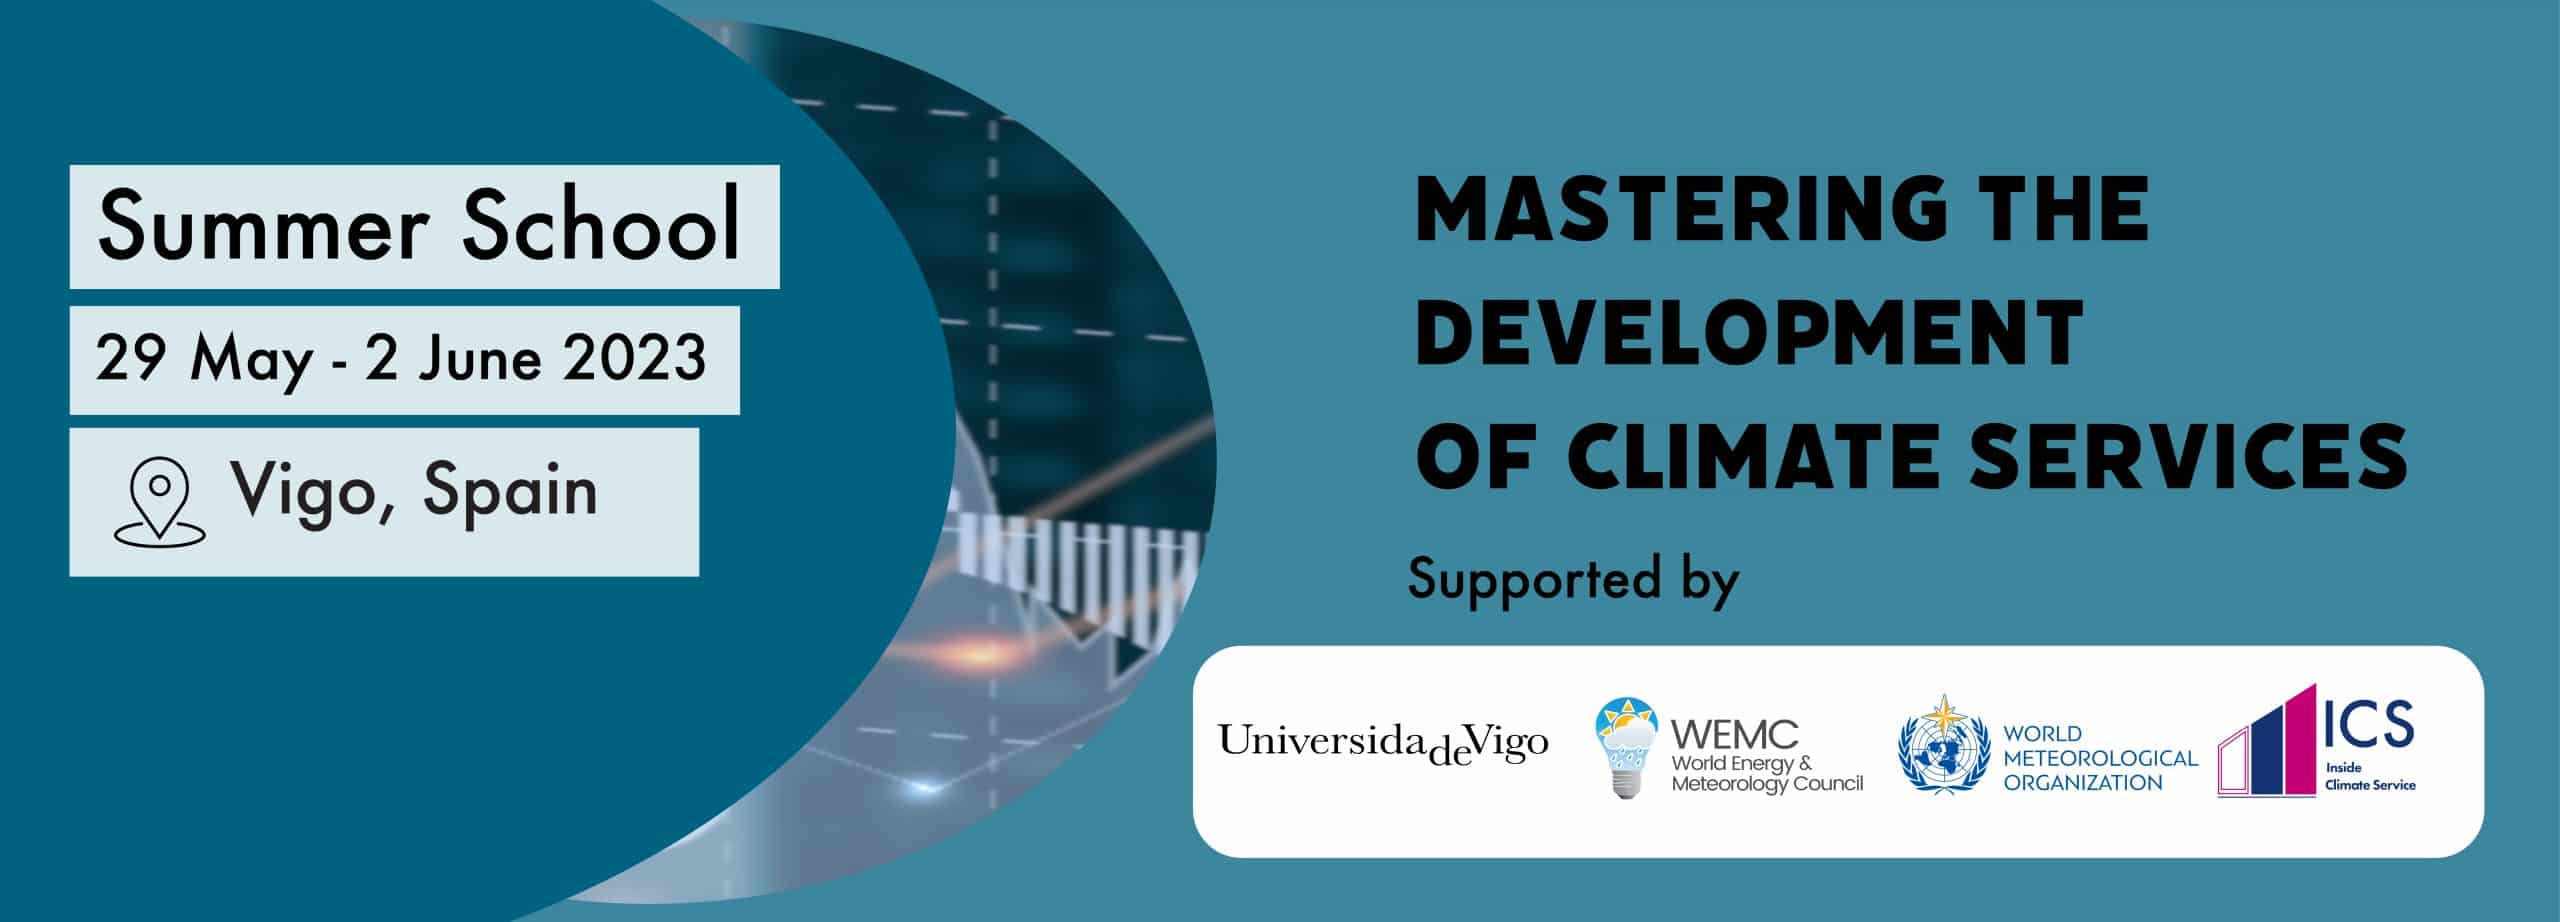 The Summer School 2023: Mastering the Development of Climate Services